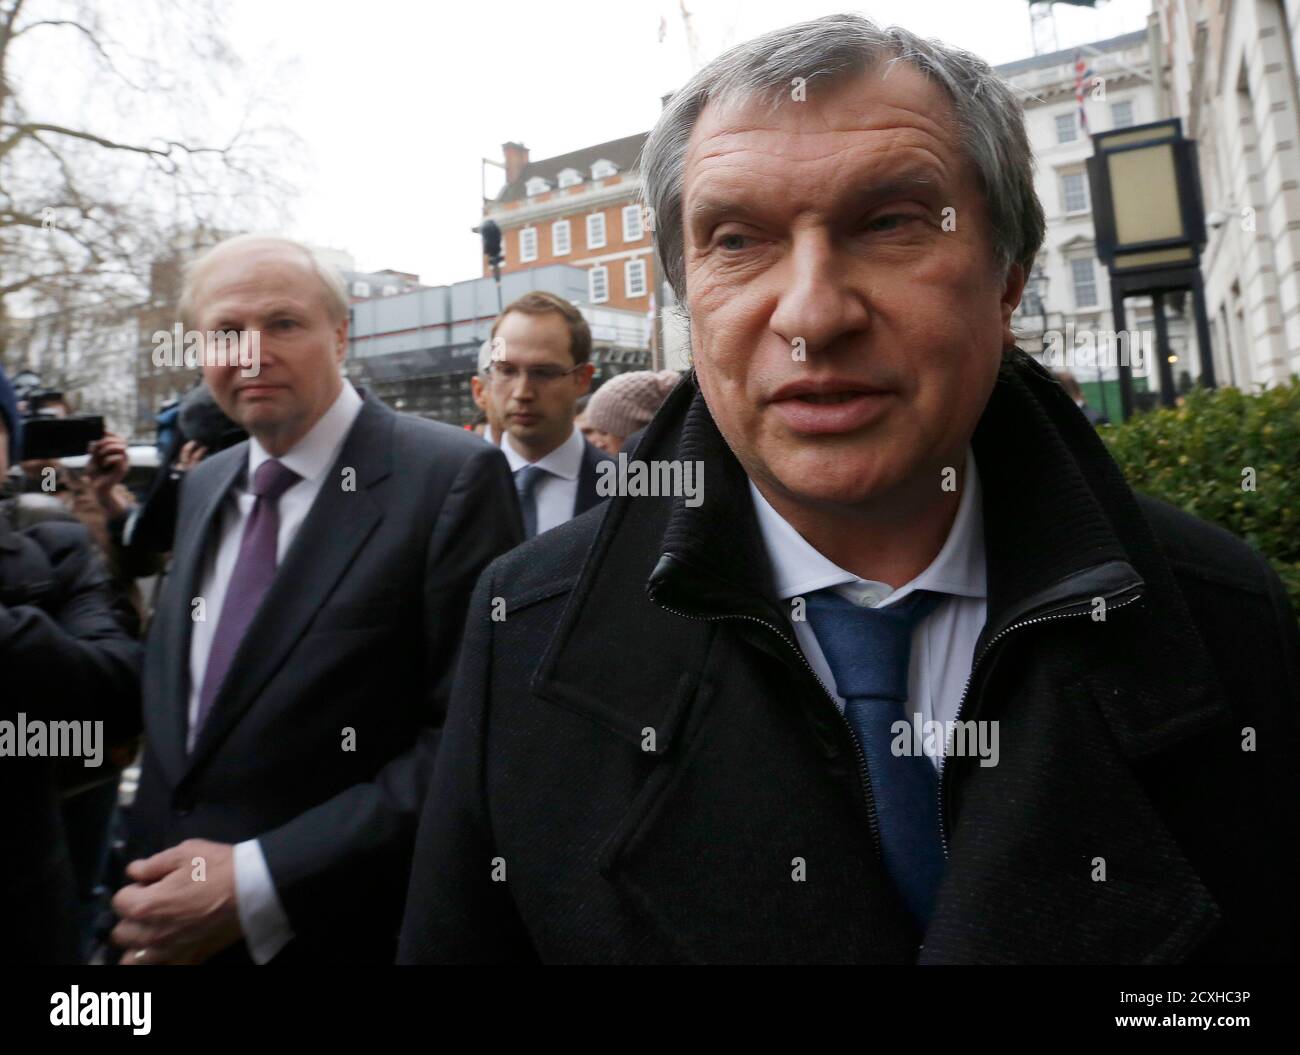 British Petroleum CEO Bob Dudley (L) and Rosneft CEO Igor Sechin arrive outside the BP headquarters in central London March 21, 2013. Russian state oil company Rosneft closed its deal to buy TNK-BP from UK-based BP and four tycoons on Thursday, releasing $40 billion cash to the sellers and becoming a bigger oil producer than Exxon Mobil. The $55 billion deal, which also gives BP a near 20 percent stake in Rosneft, was announced last year after months of on-off negotiations. It is the biggest in Russia's corporate history.. REUTERS/Olivia Harris (BRITAIN - Tags: BUSINESS POLITICS ENERGY) Stock Photo